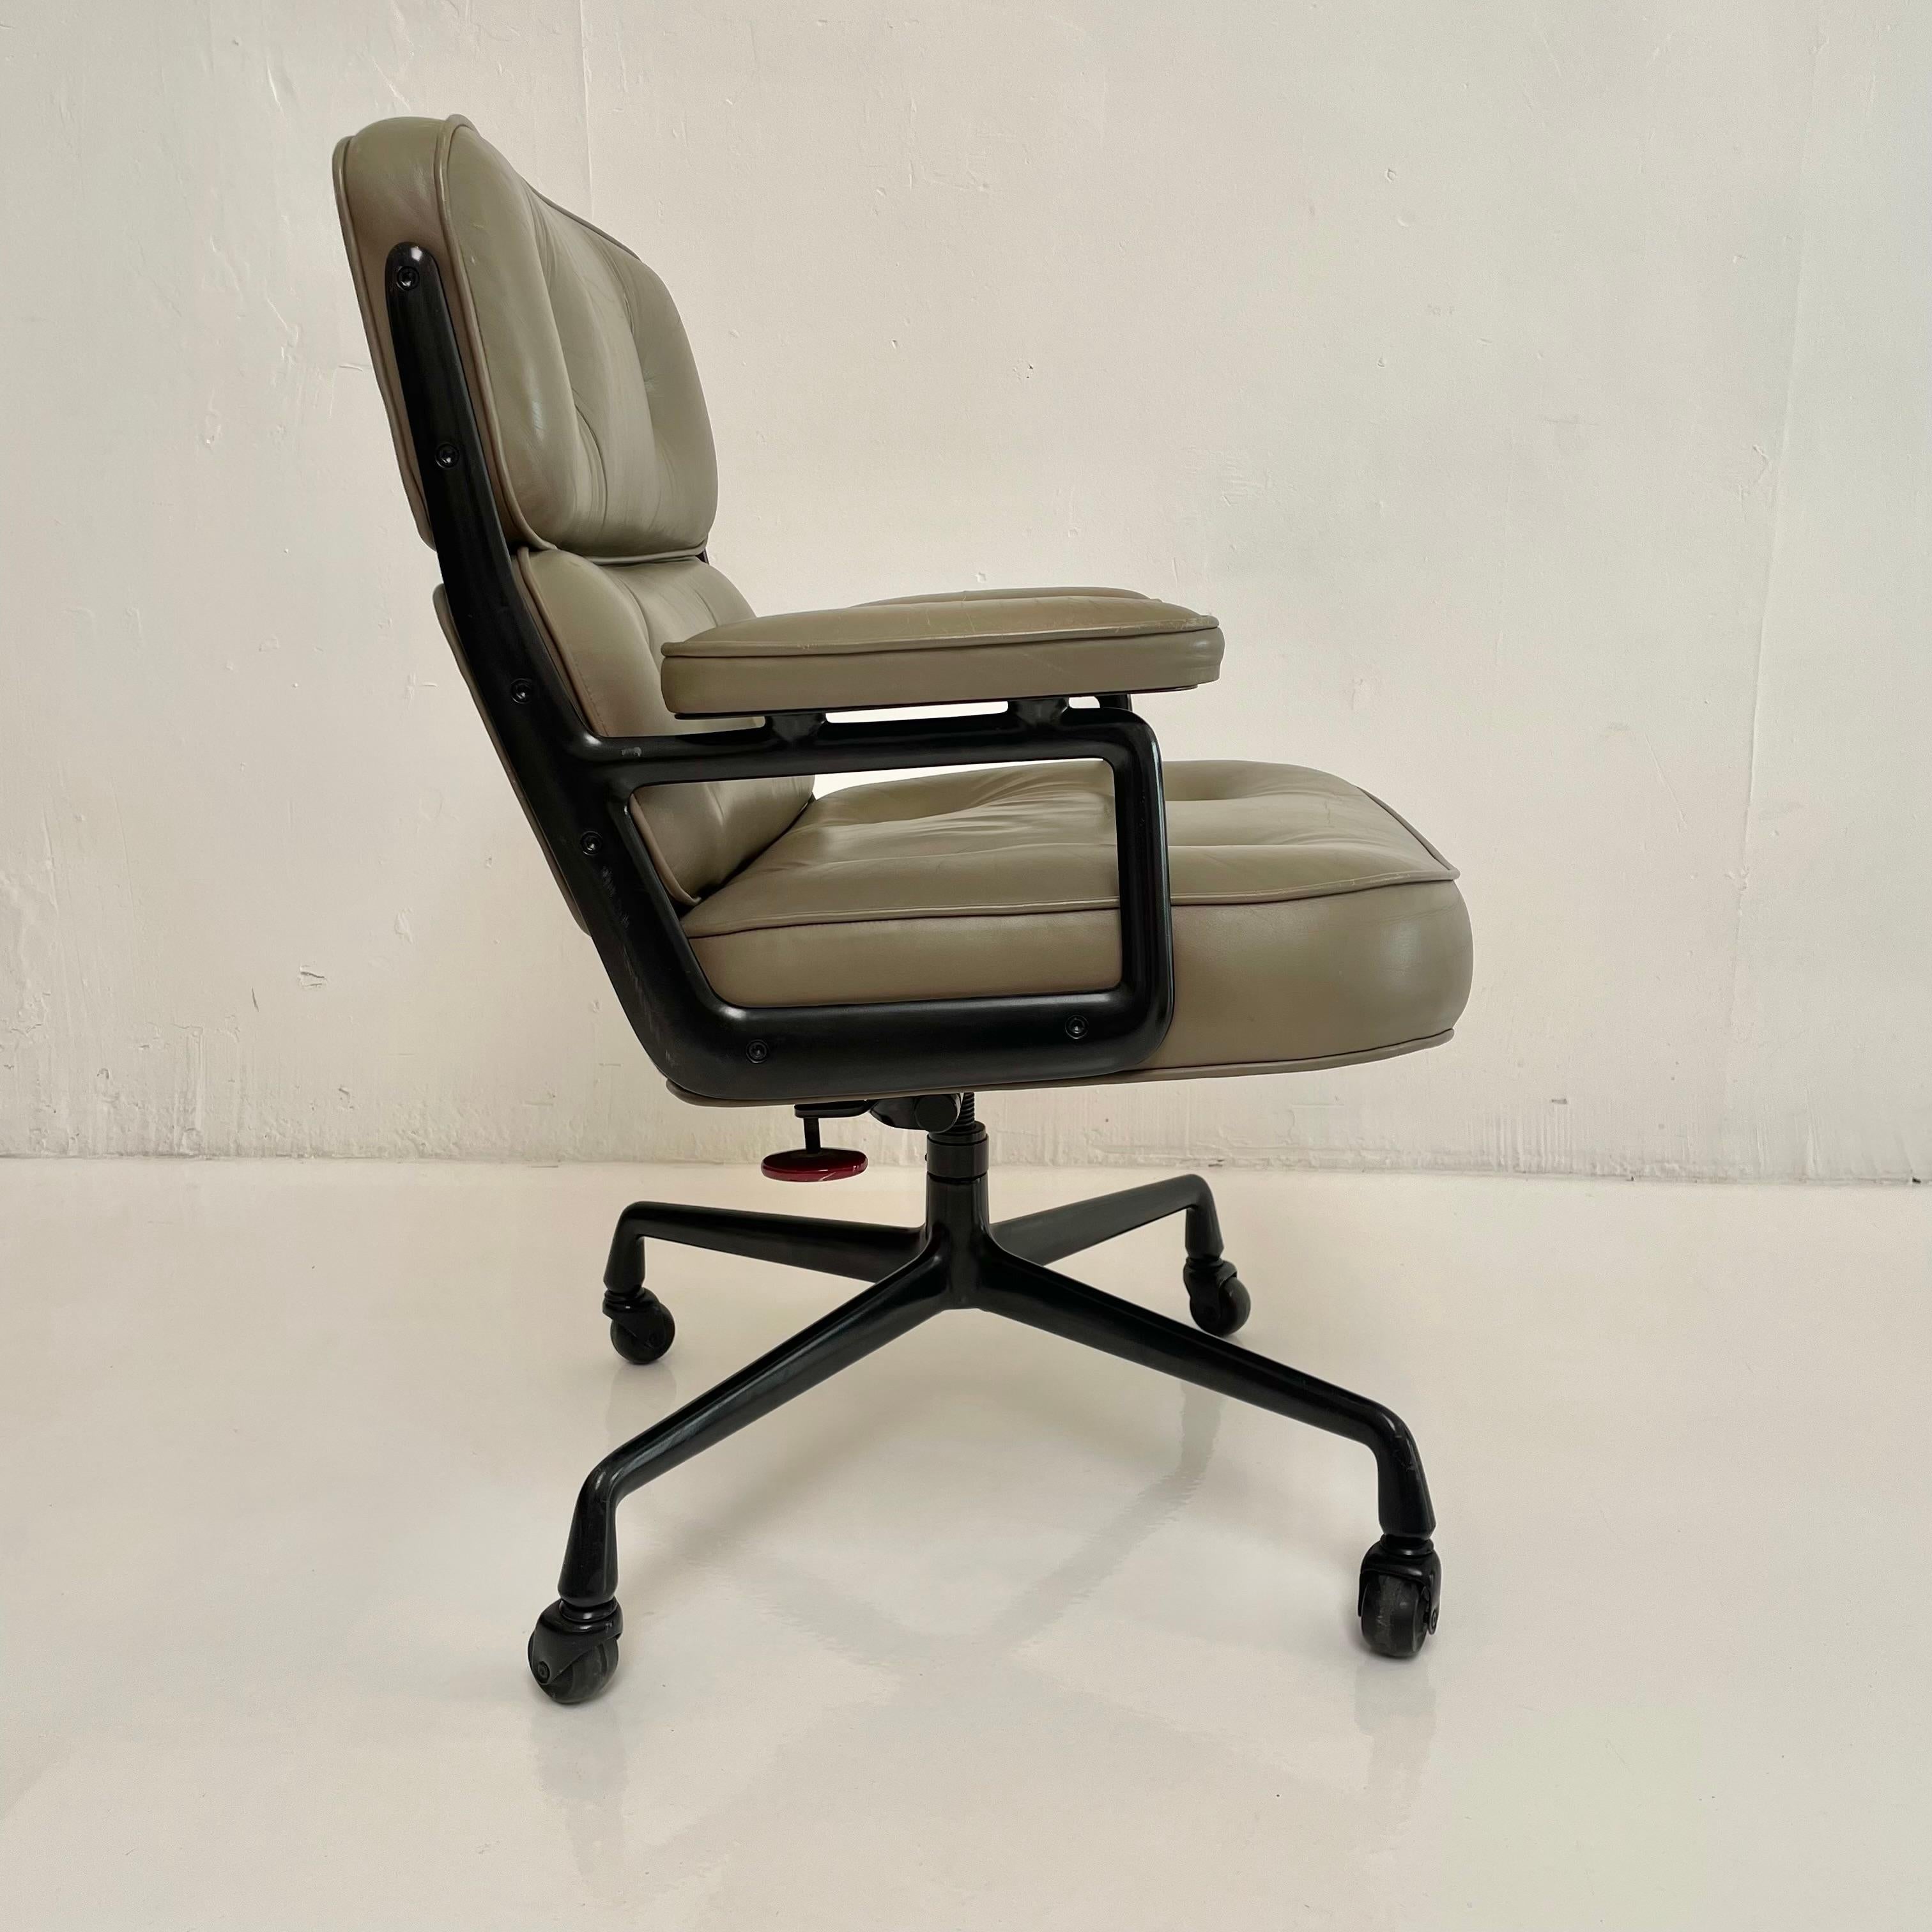 North American Eames Time Life Chair in Olive Leather for Herman Miller, c. 1984 USA